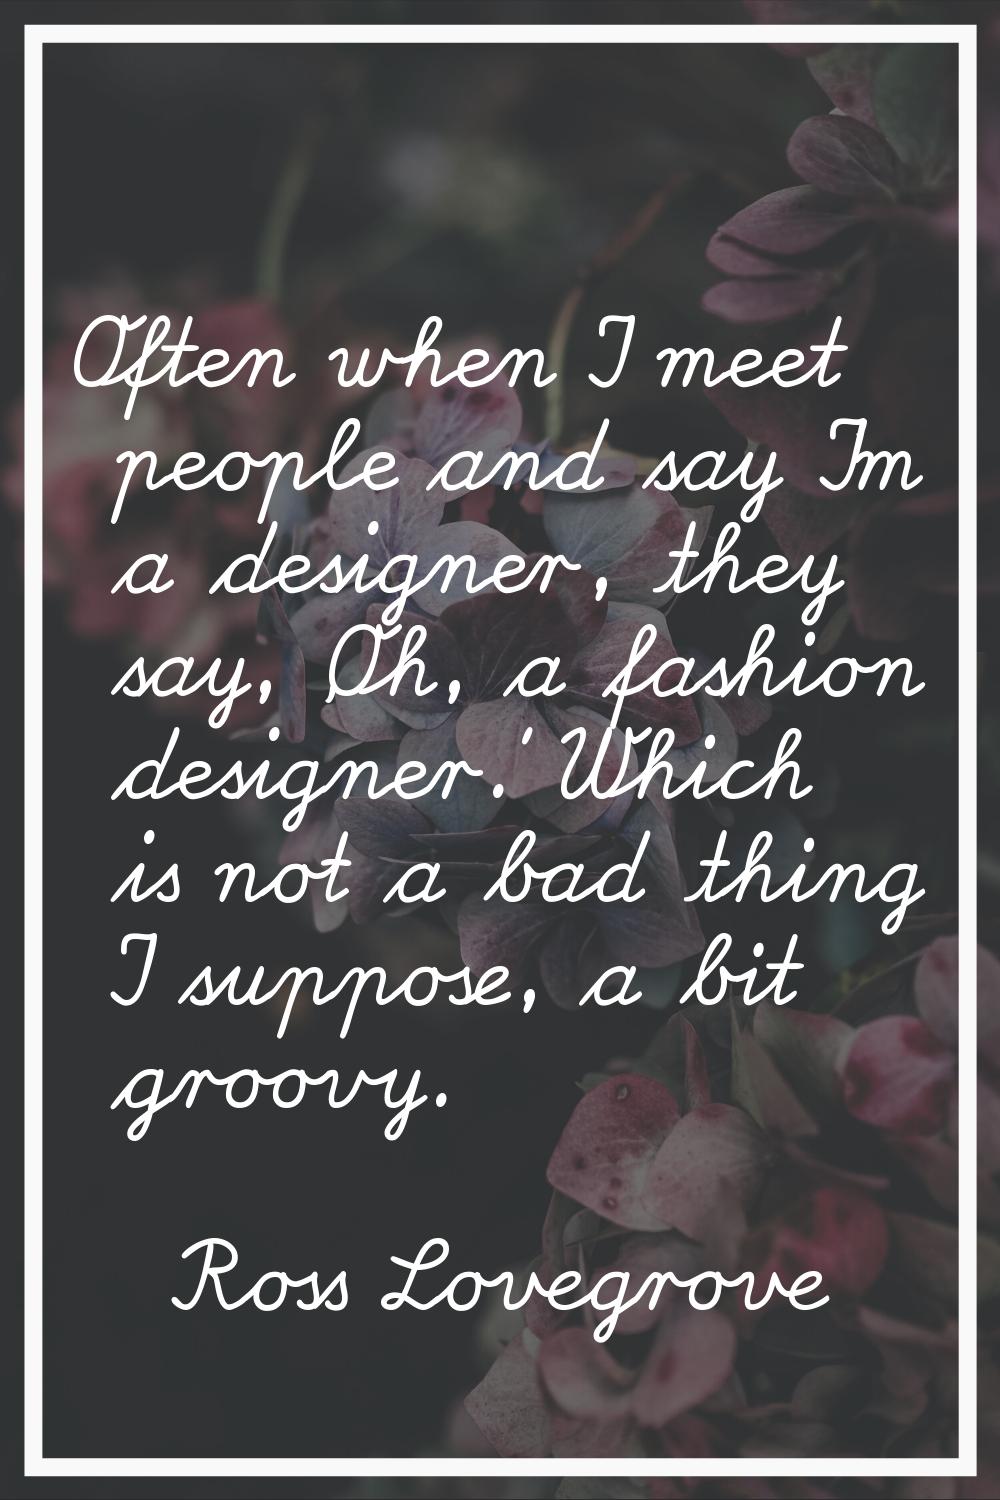 Often when I meet people and say I'm a designer, they say, 'Oh, a fashion designer.' Which is not a